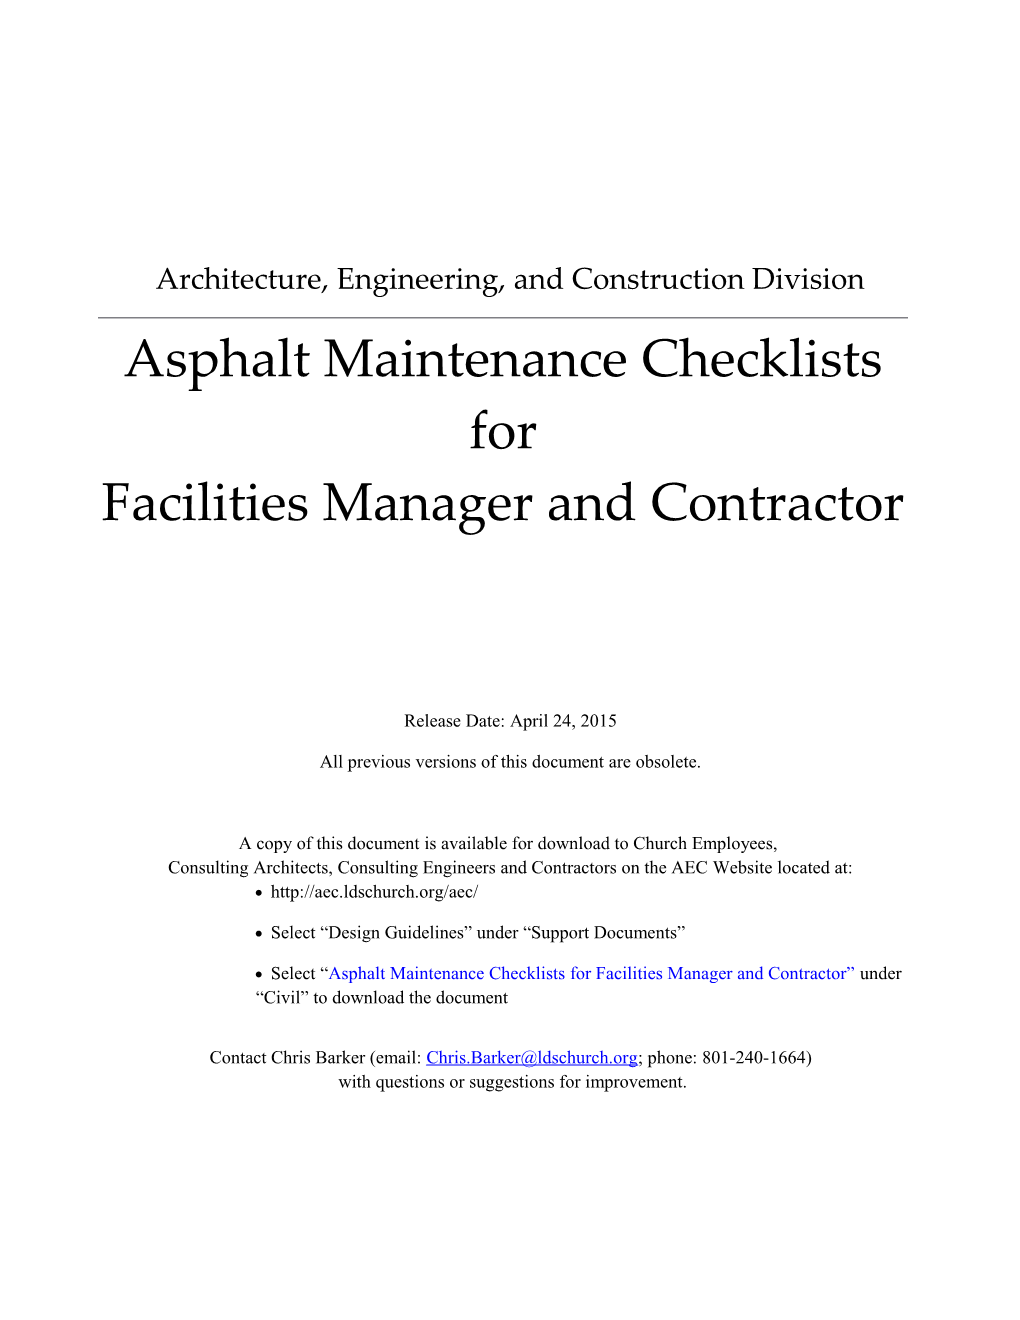 Asphalt Maintenance Checklists for Facilities Manager and Contractor